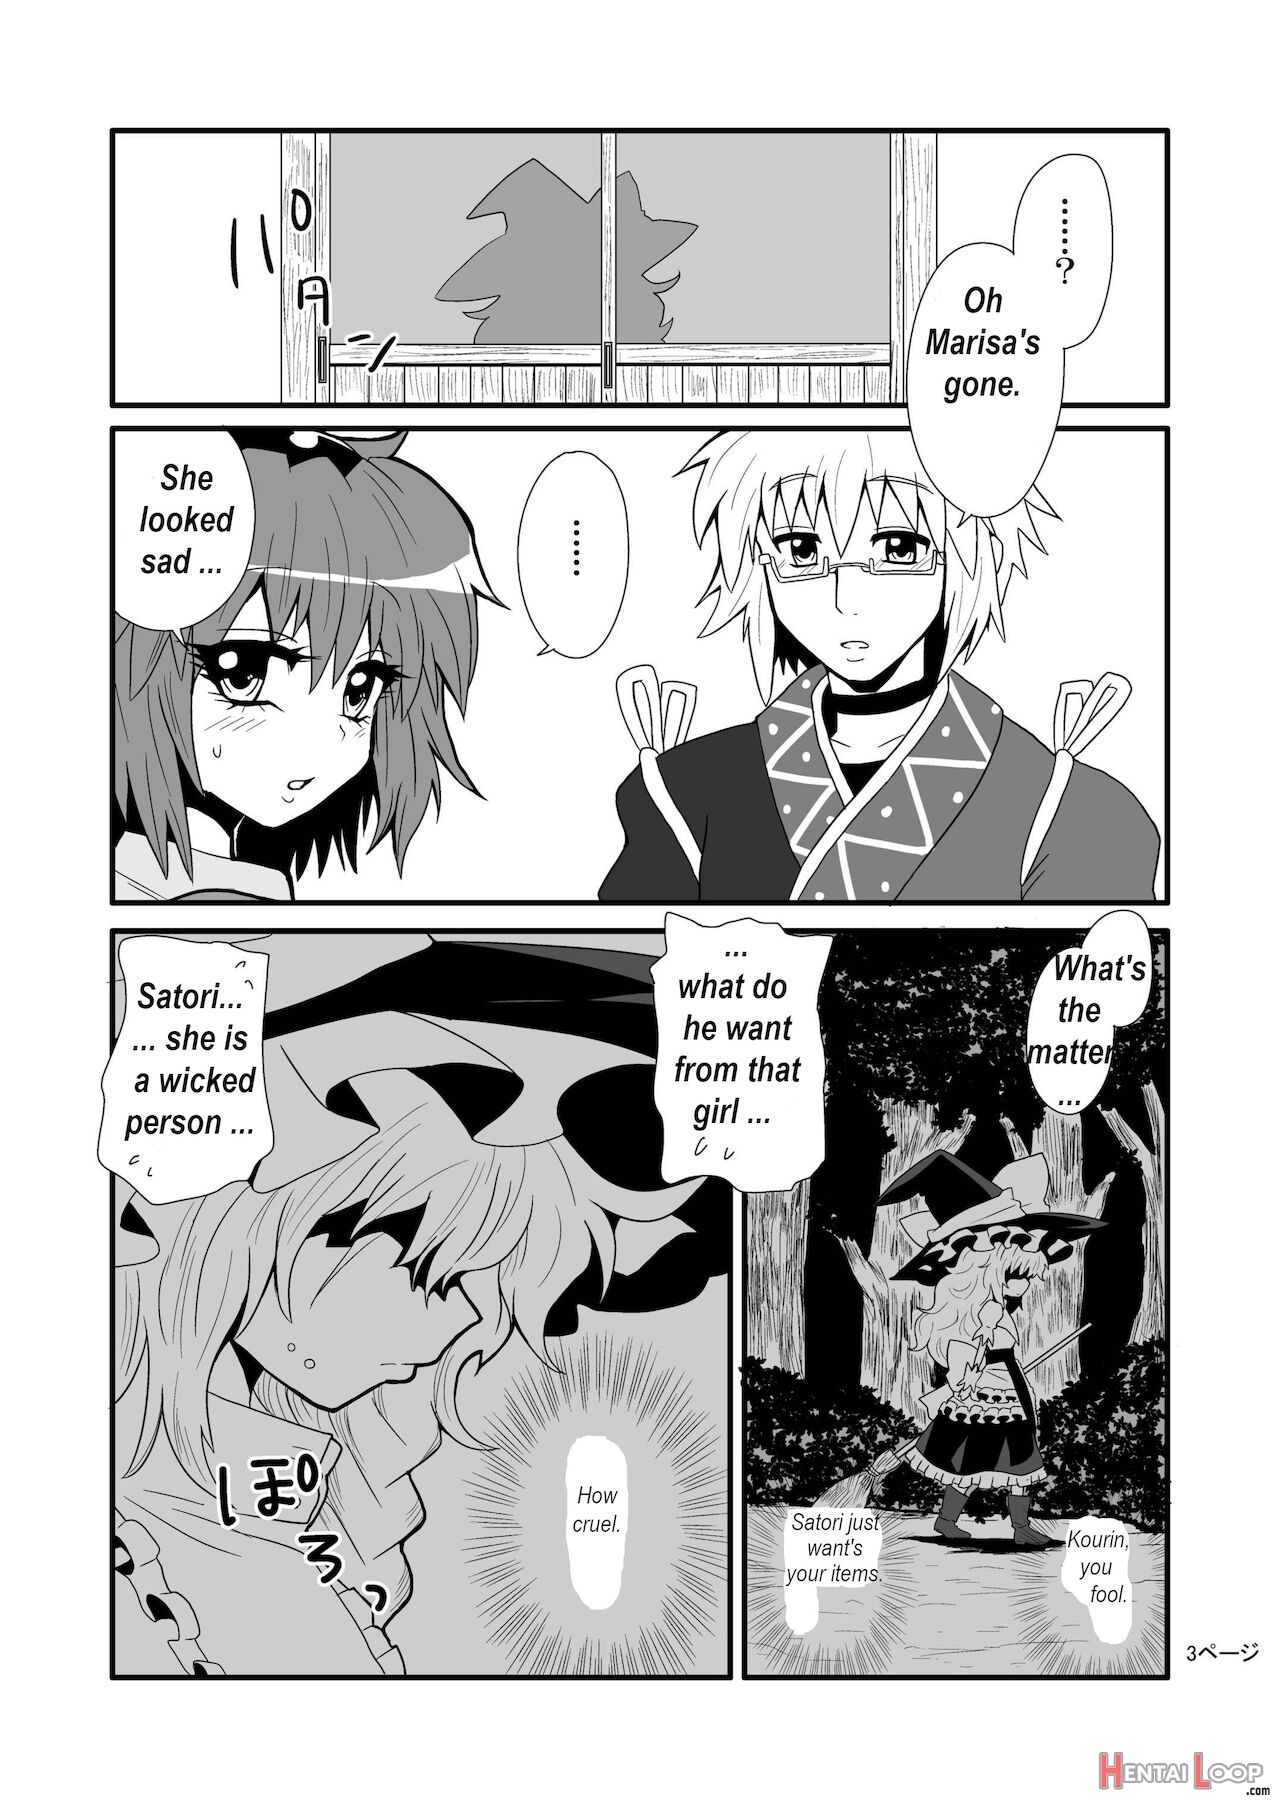 Marisa's Thrill - Take Care Of Yourself - 通り魔理沙にきをつけろ - Part 1 page 5